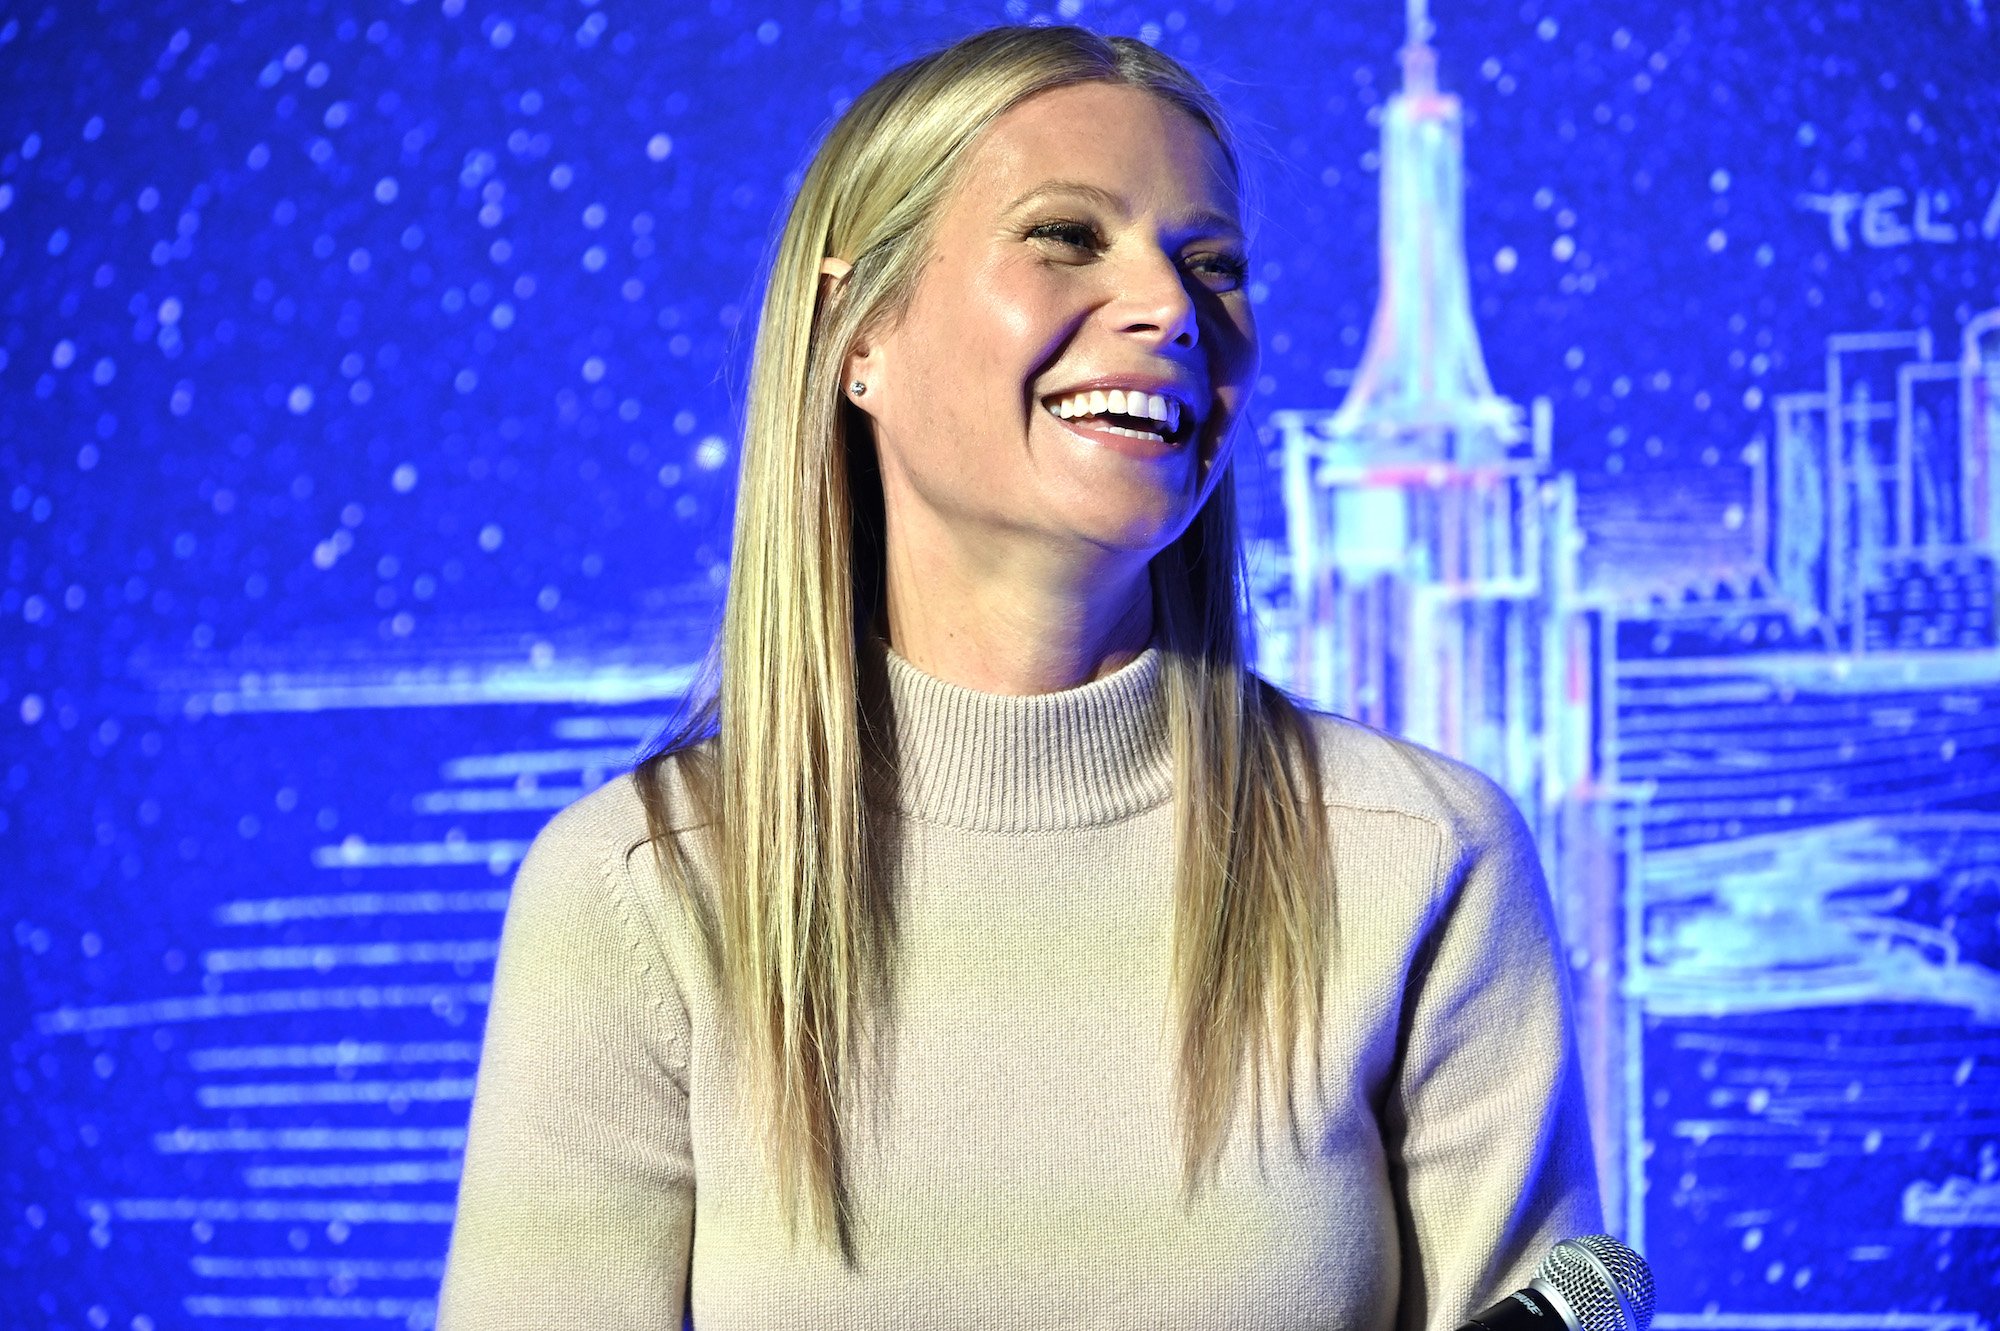 Gwyneth Paltrow laughing, looking to the right, sitting in front of a blue background